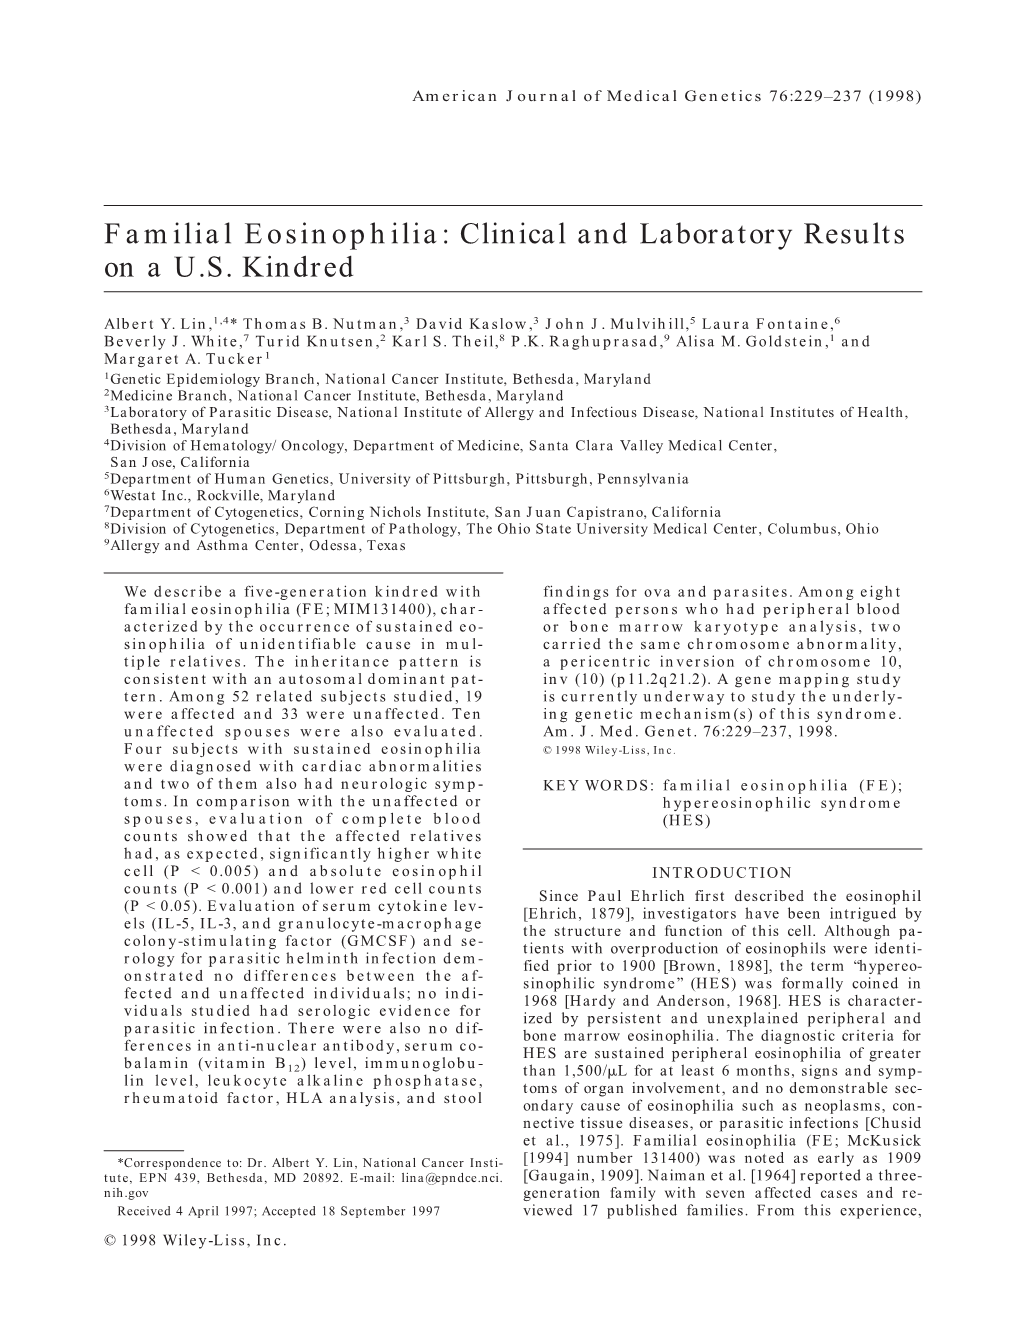 Familial Eosinophilia: Clinical and Laboratory Results on a U.S. Kindred